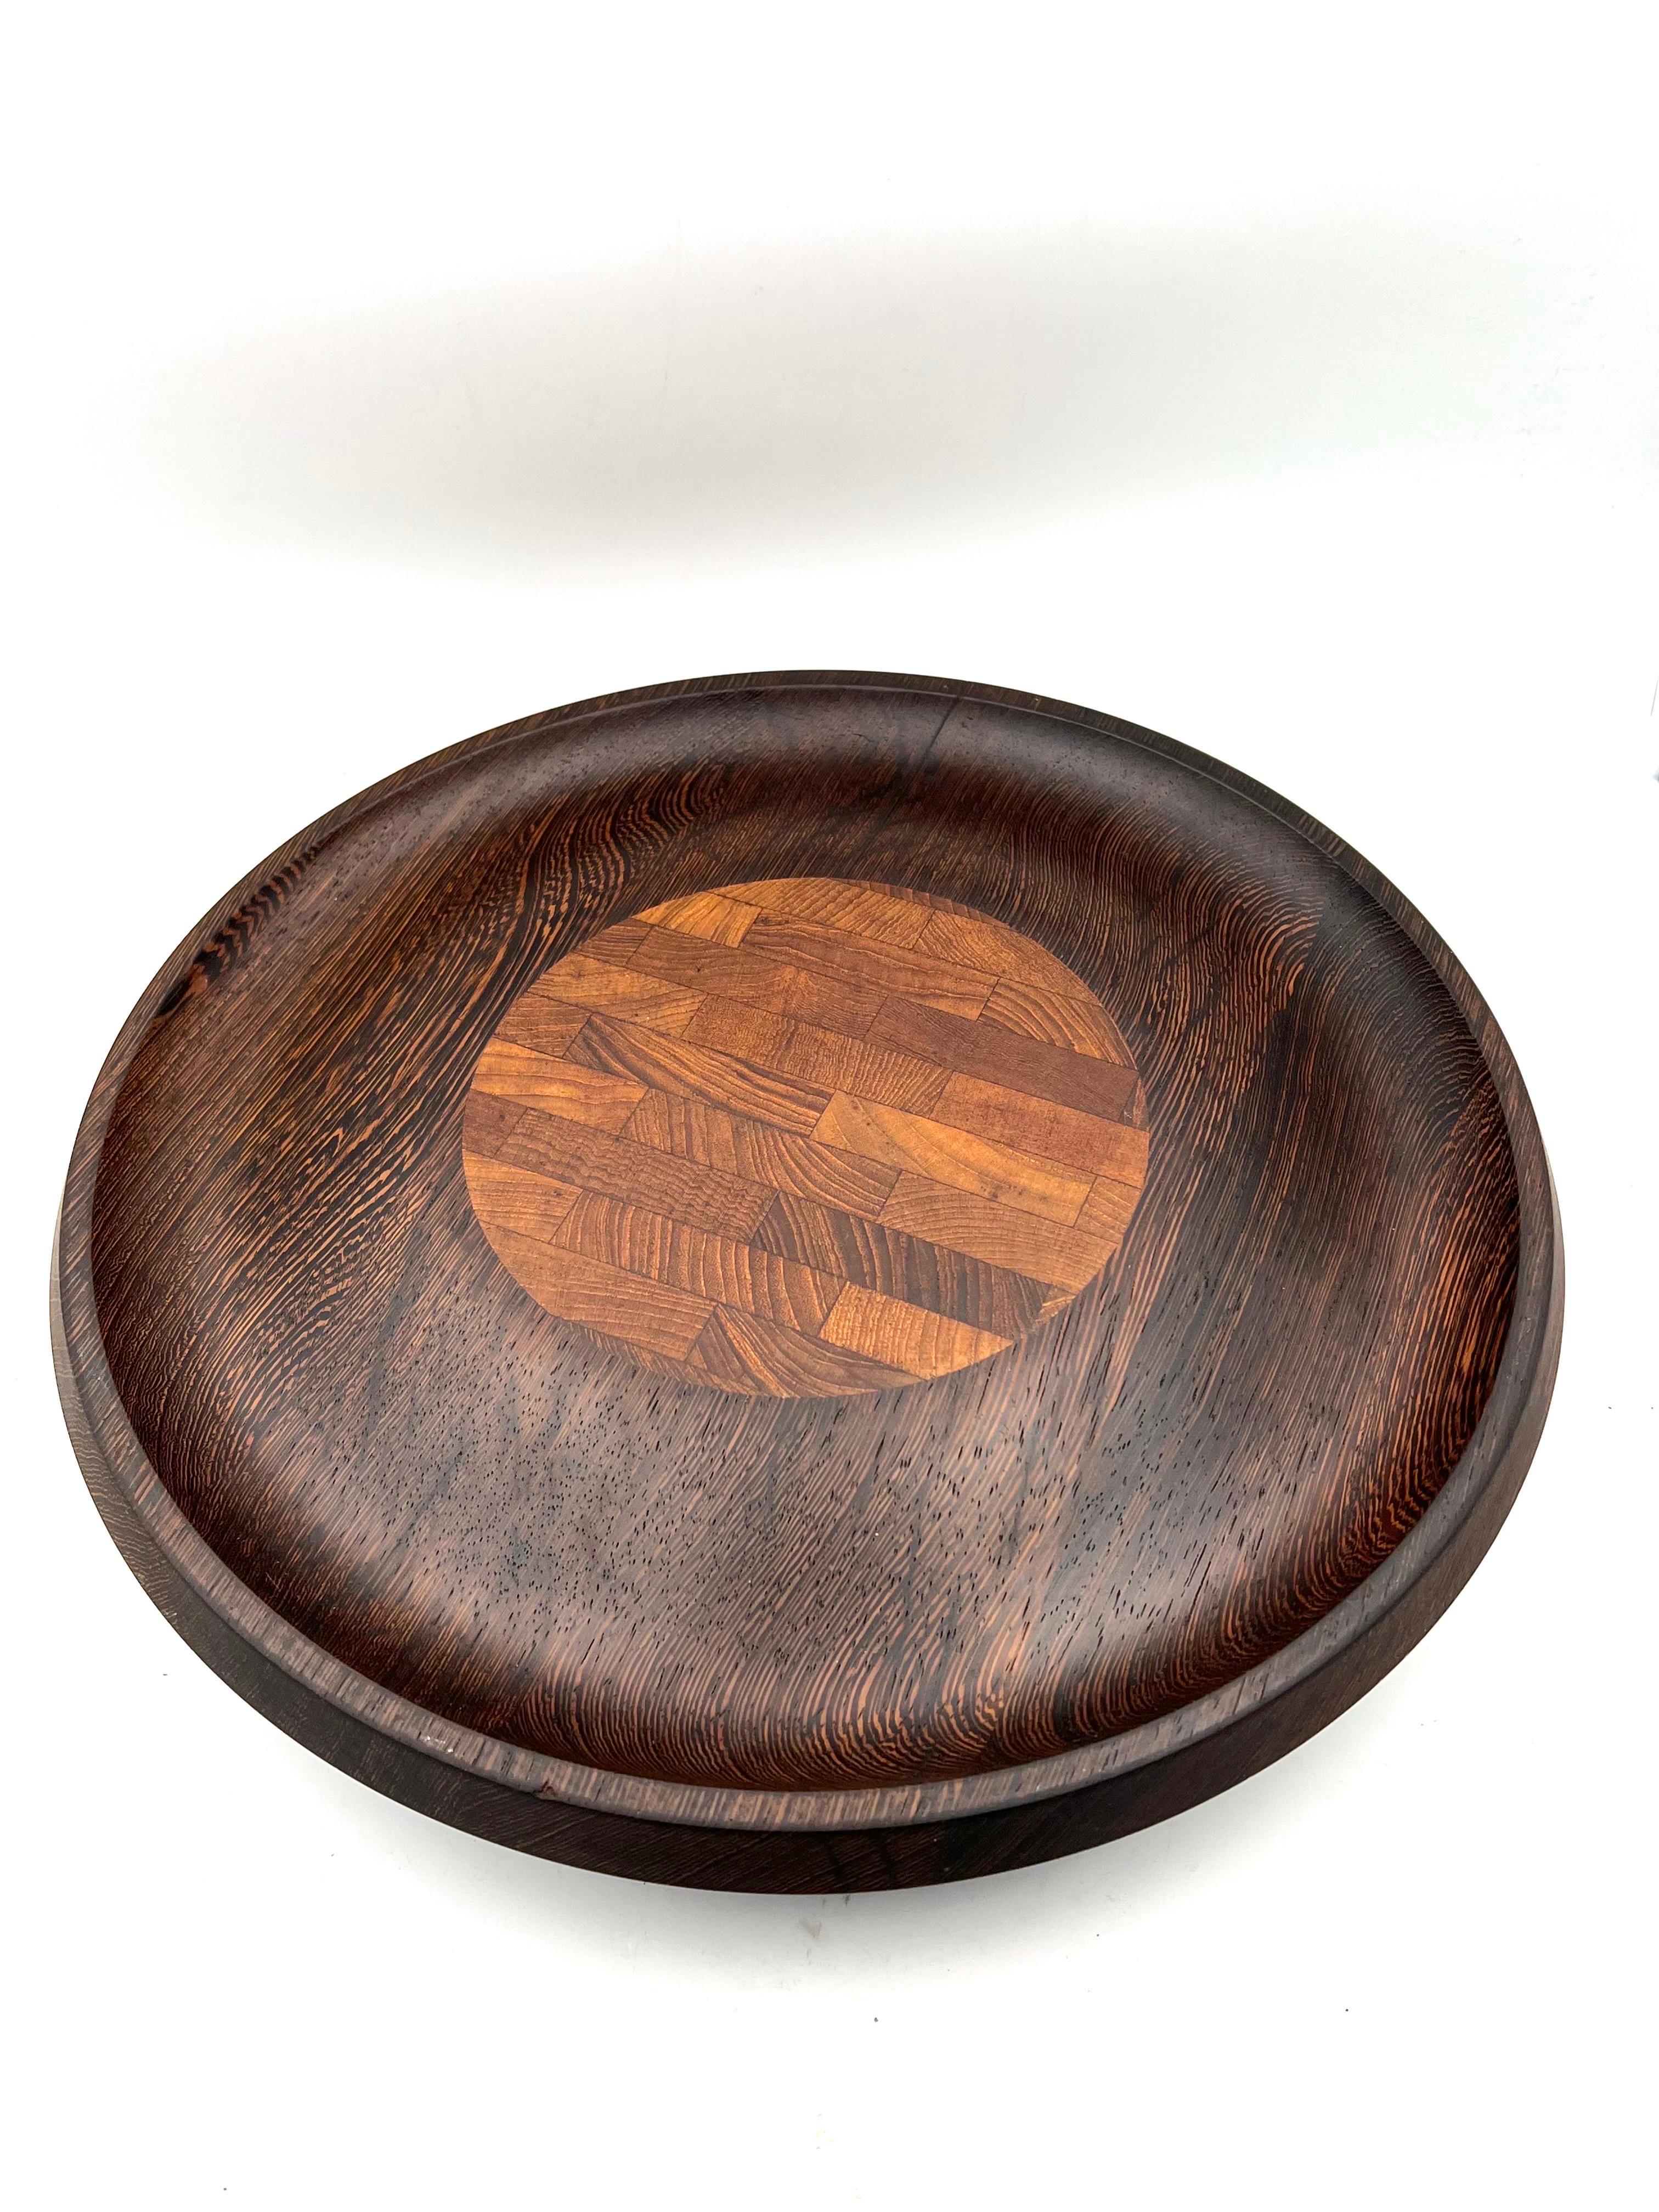 Large tray designed by Jens Quistgaard for the Dansk Rare Woods Collection. Constructed of Wenge. Introduced in 1961, the Rare Woods line represented the finest designs and materials Dansk had to offer. 

Dansk described them:
Good design grows